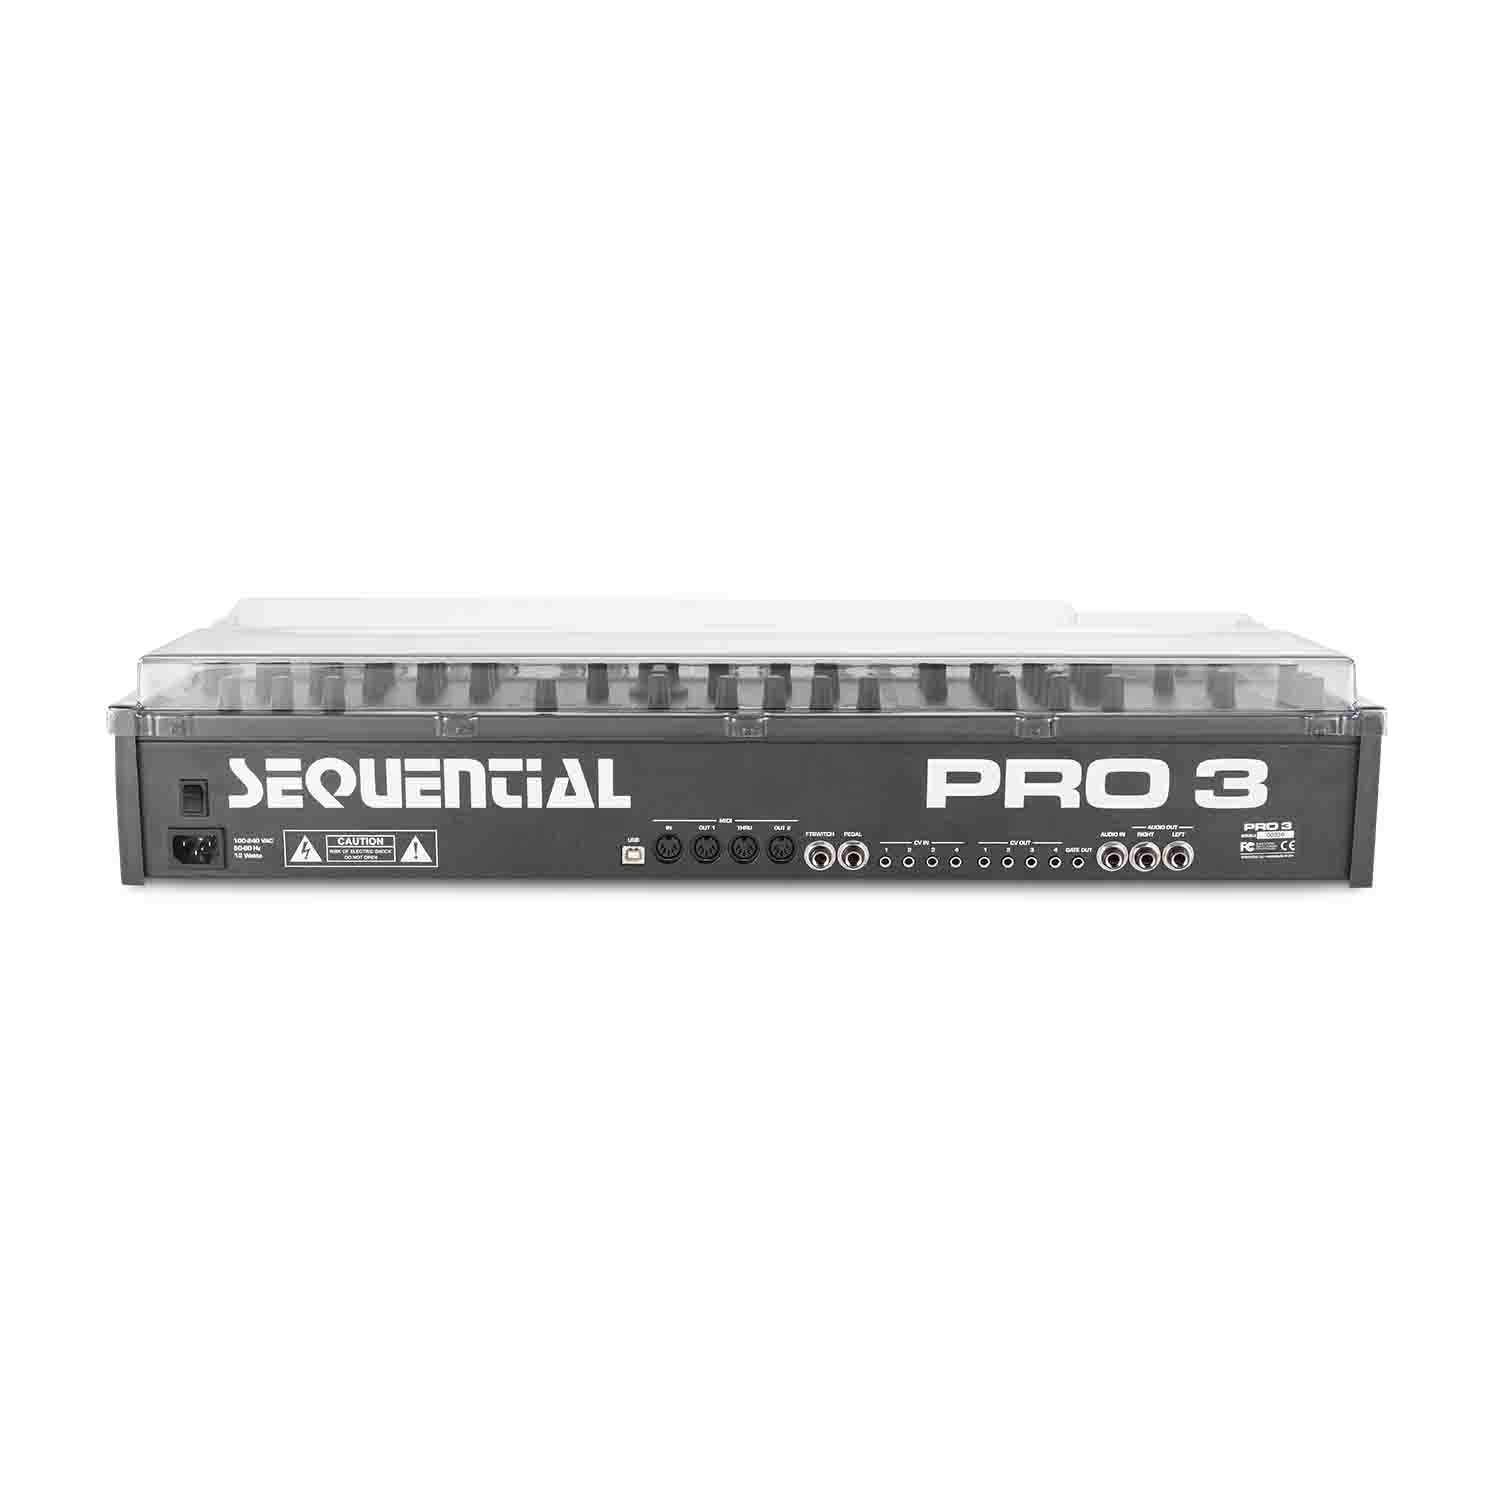 Decksaver DS-PC-PRO3 Protection Cover for Sequential Pro 3 Synthesizer - Hollywood DJ